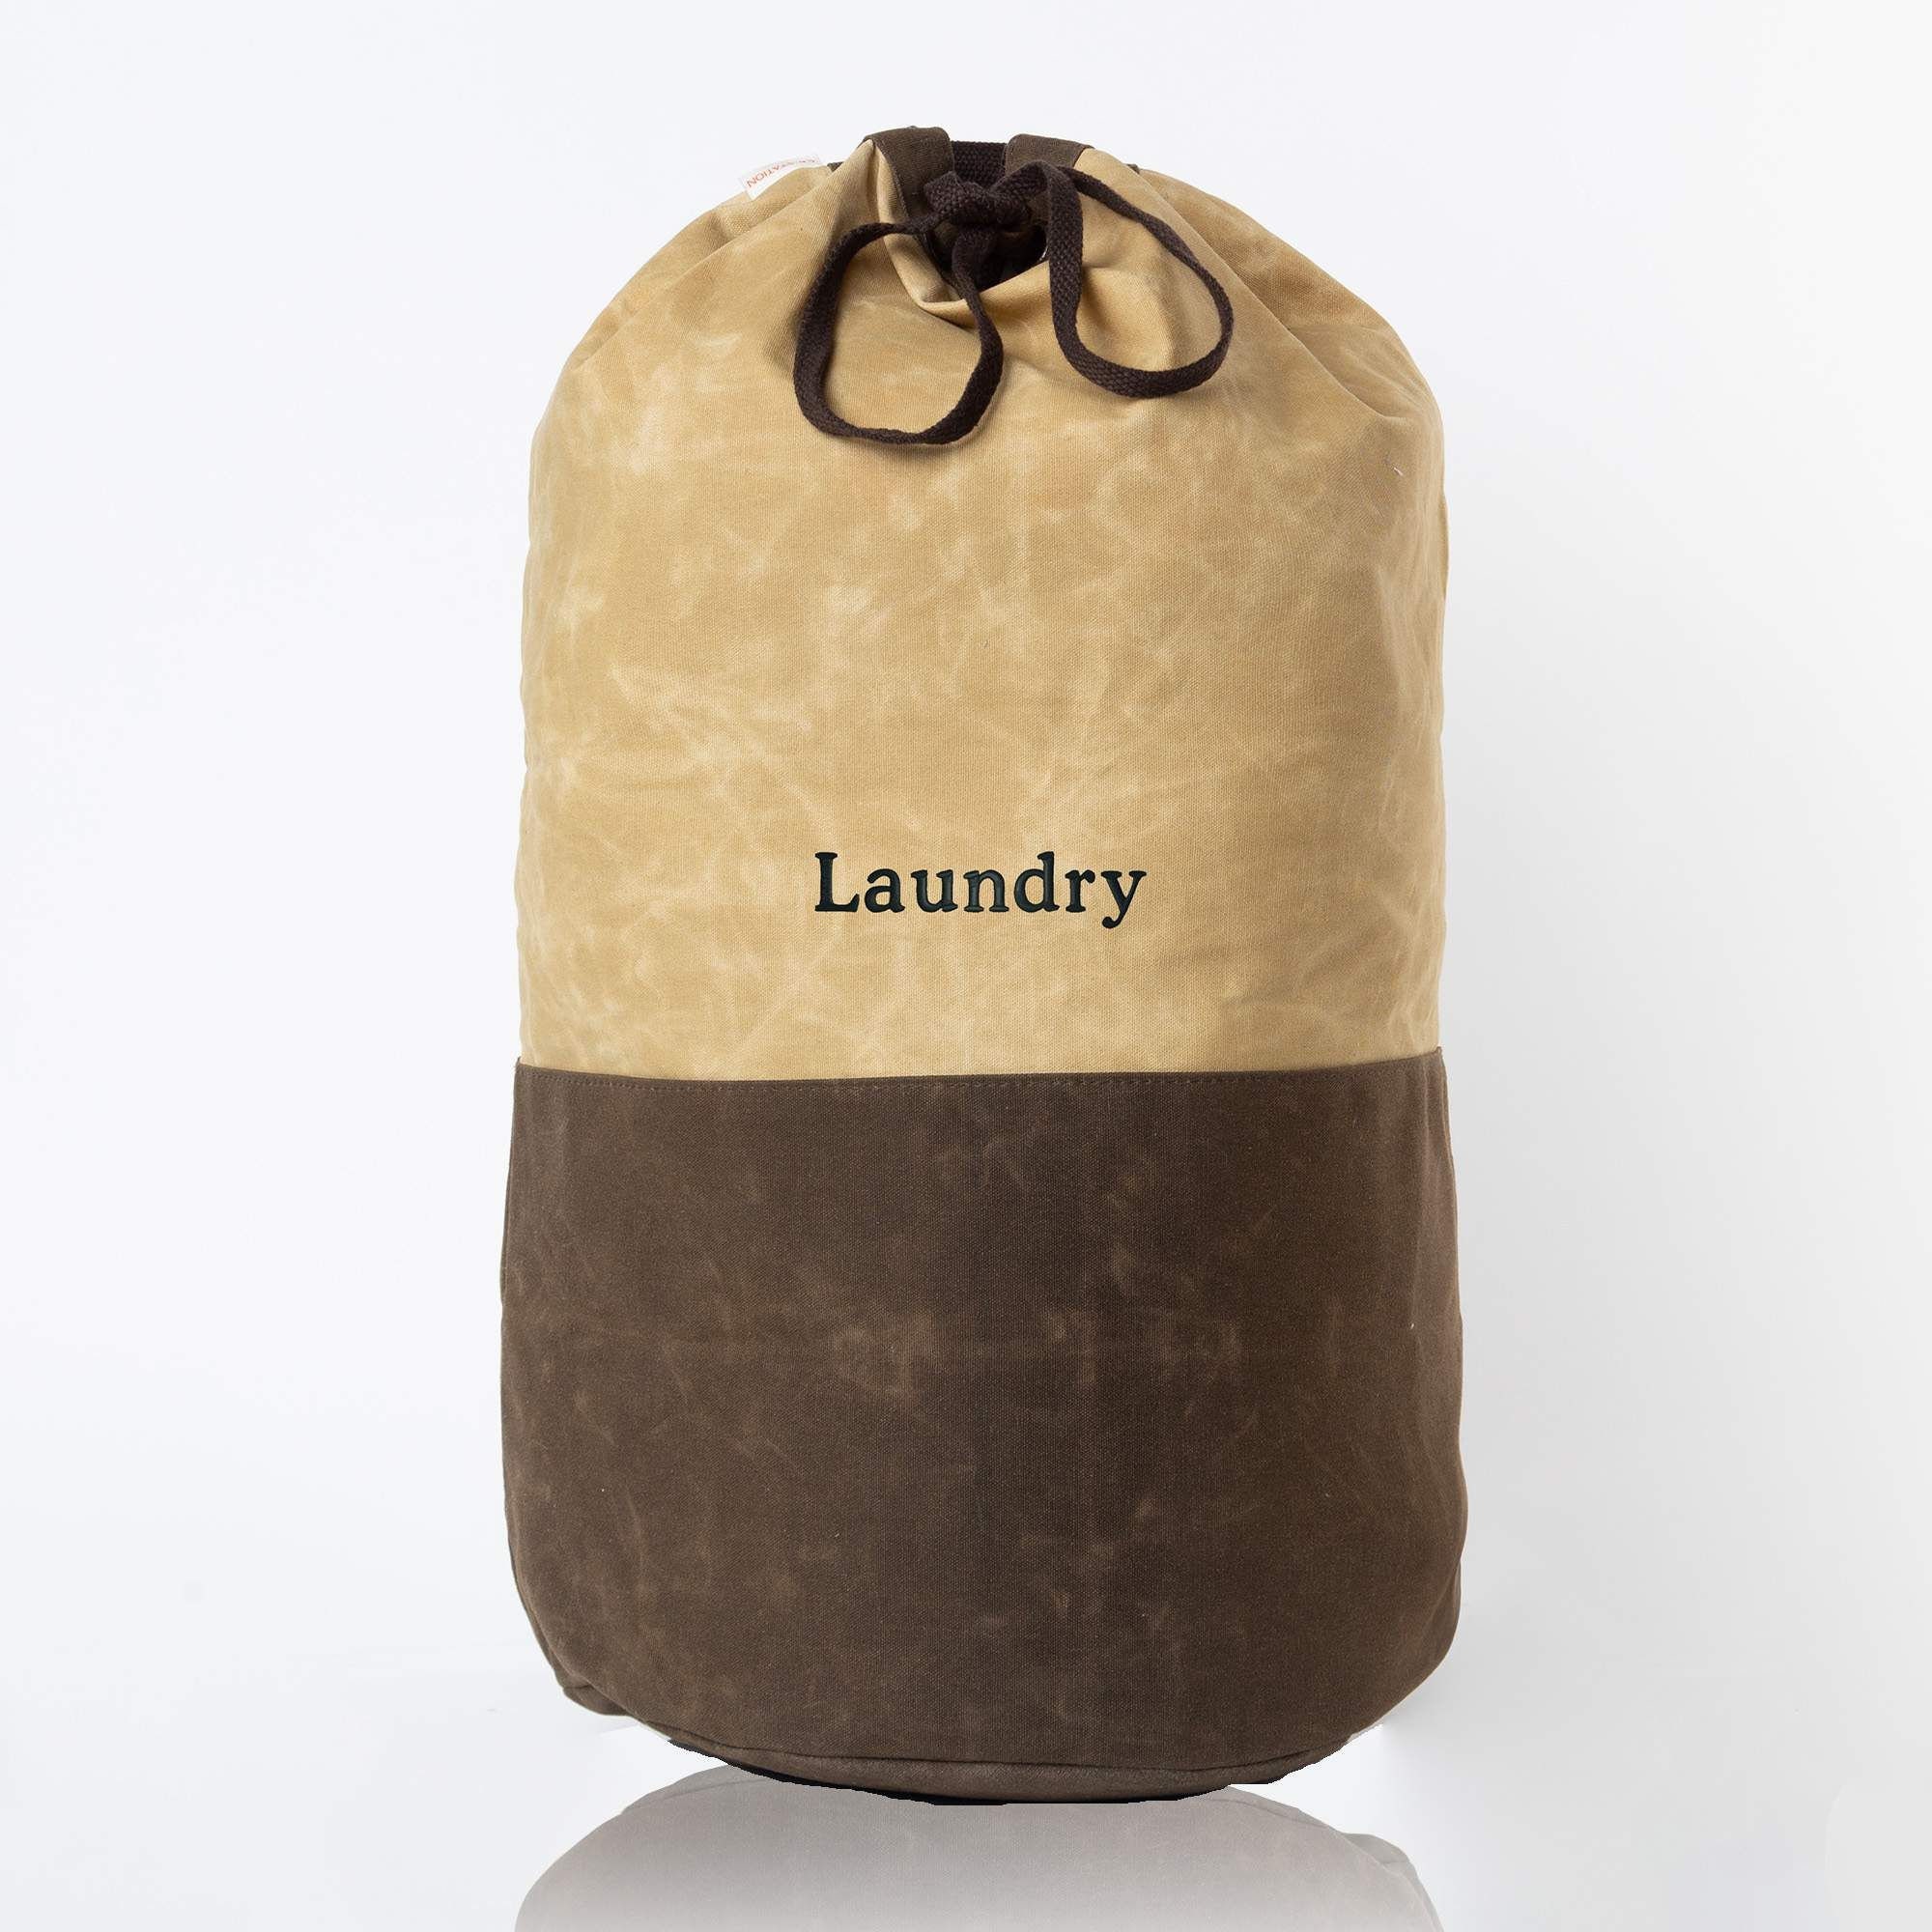 Laundry Bags with Embroidery LAUNDRY size 70x50cm Cotton-Poly